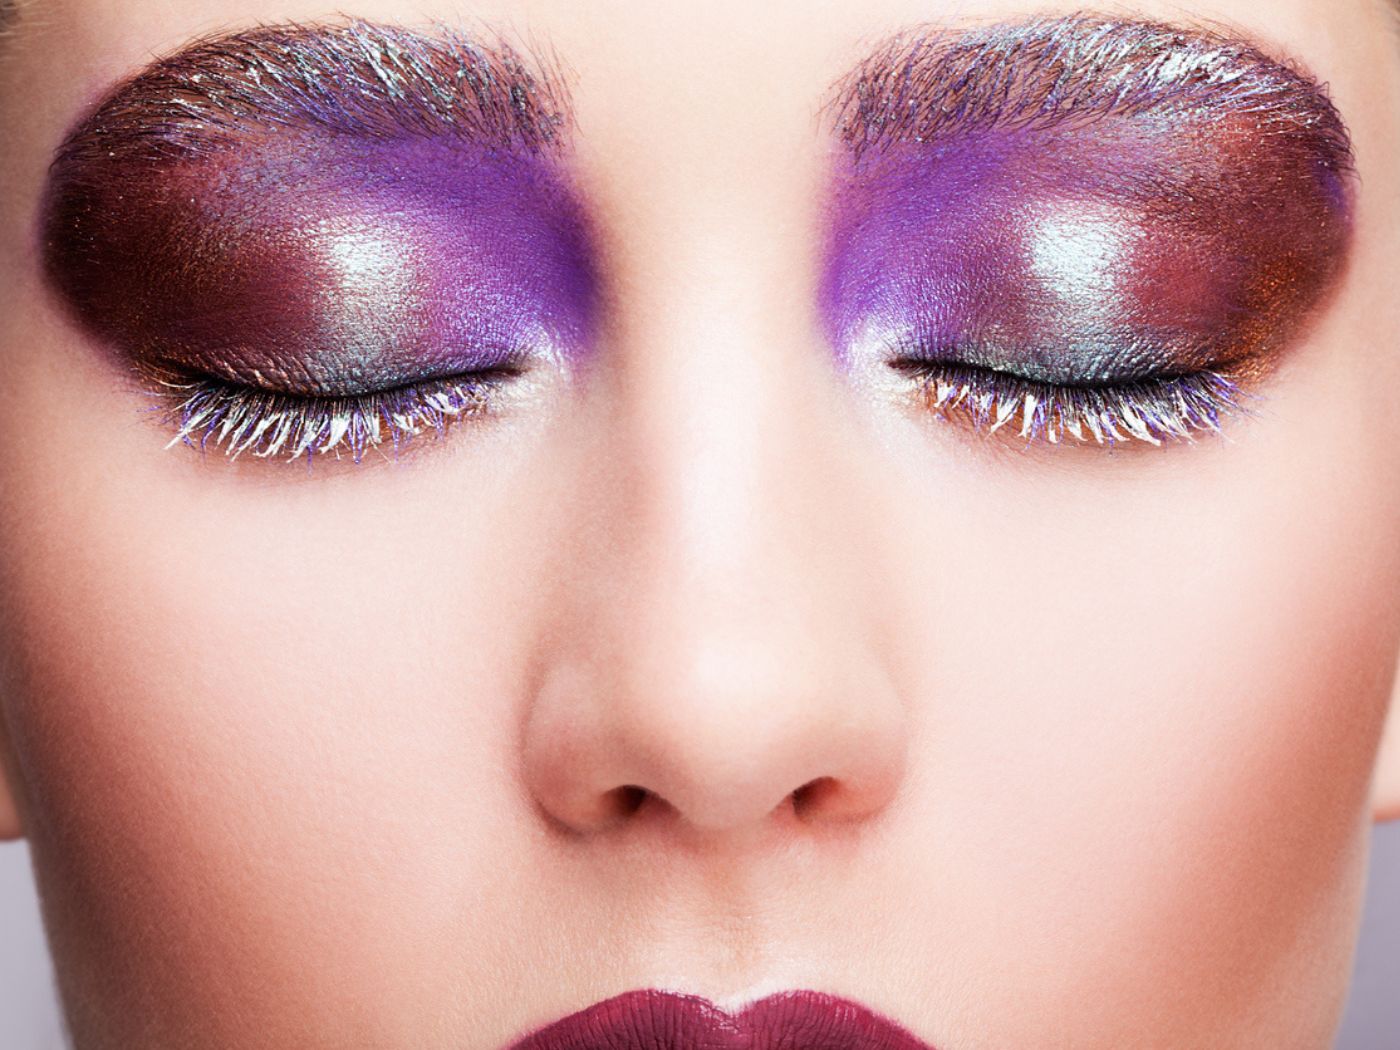 Closed eyes with dramatic purple and dark red eyeshadow